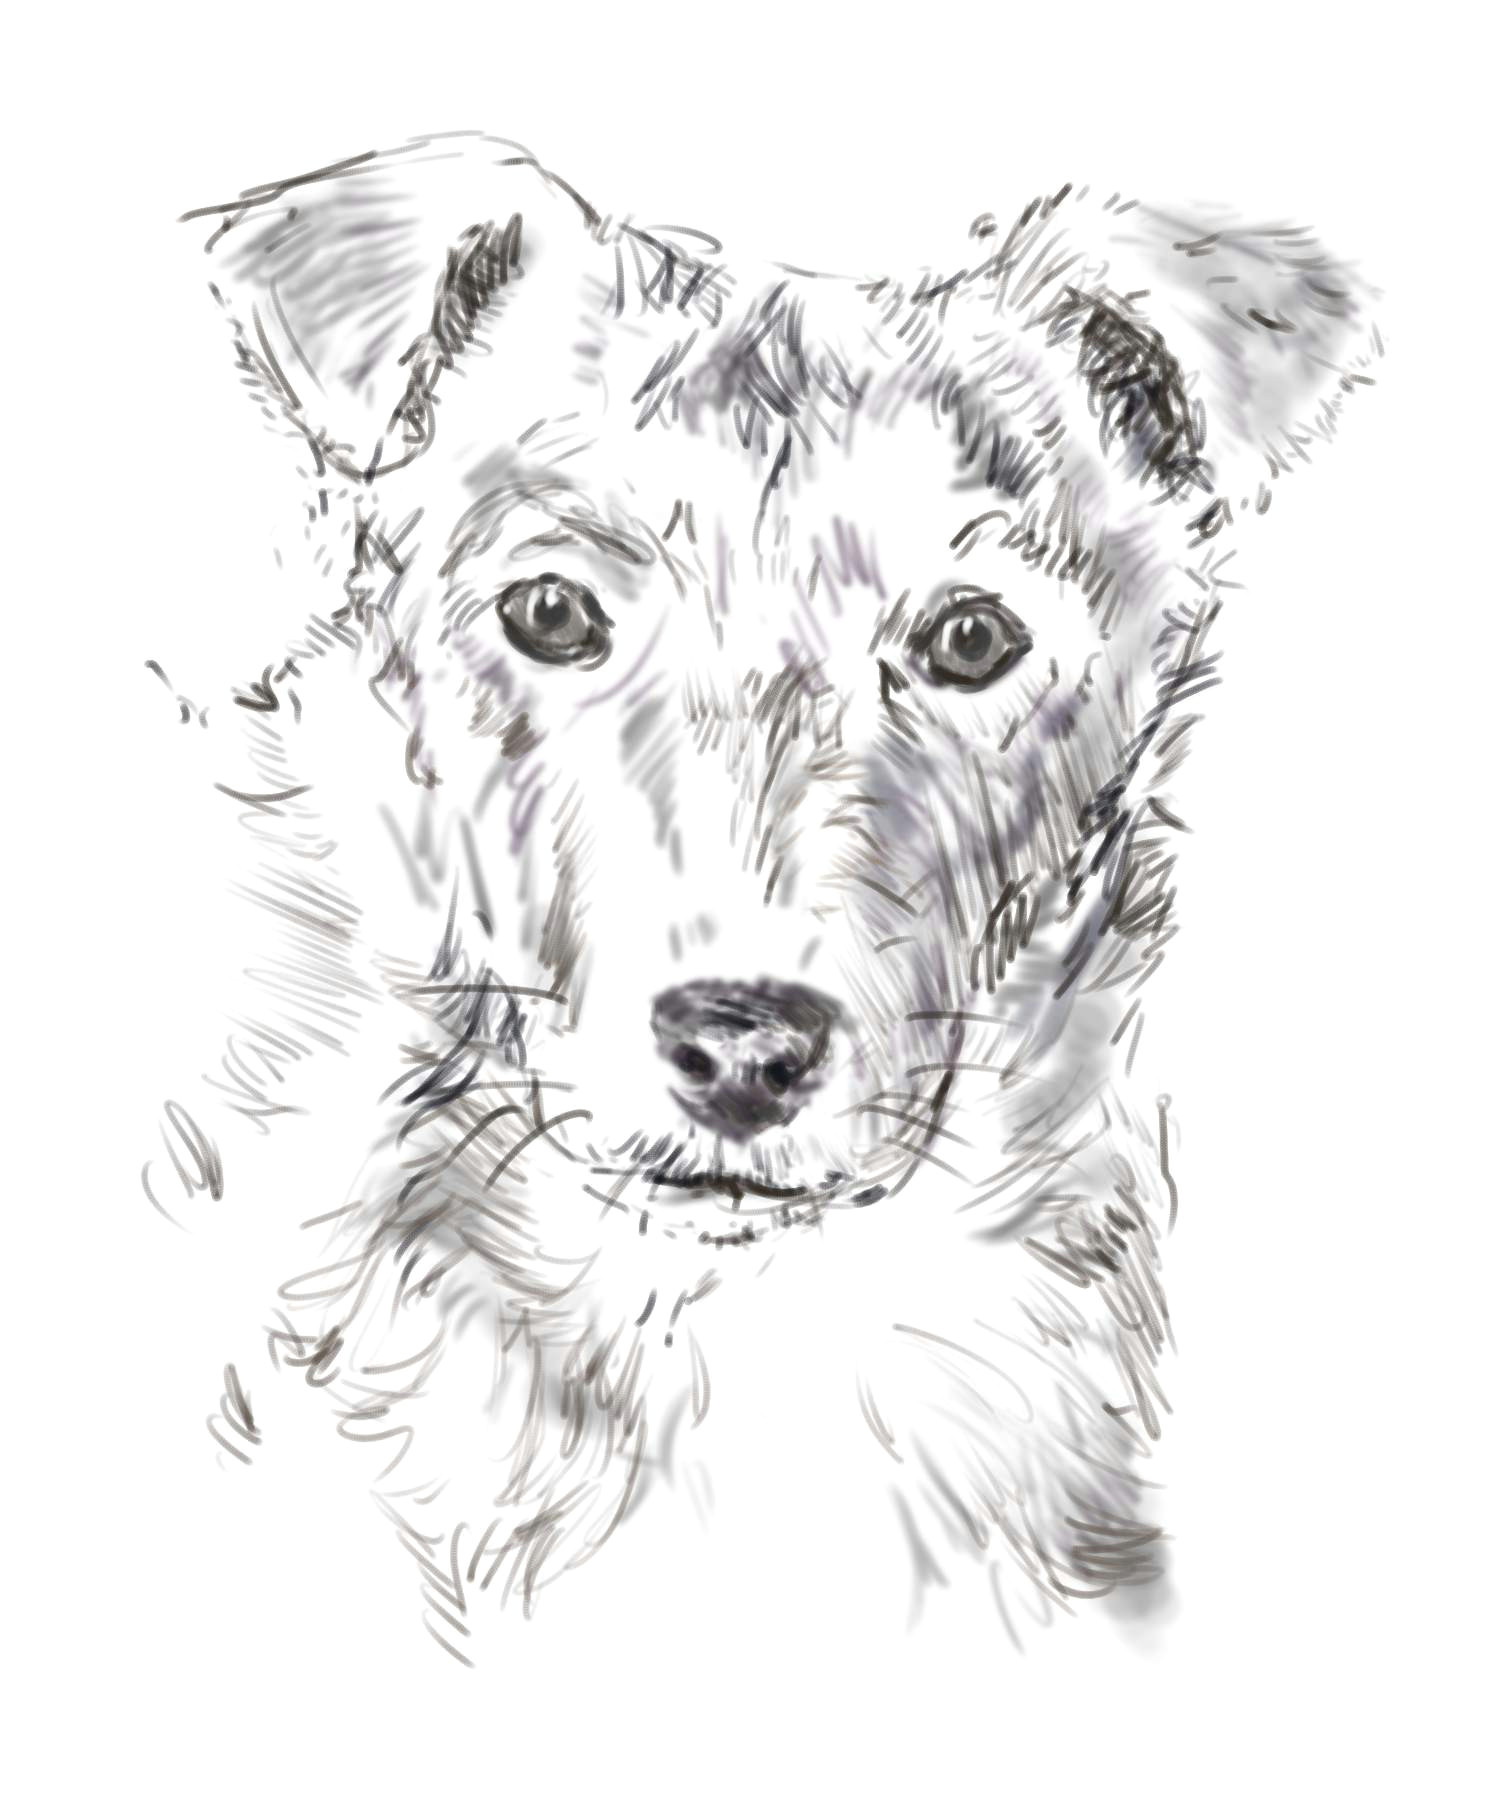 Drawing Of A Dog Biscuit How to Draw A Dog From A Photograph